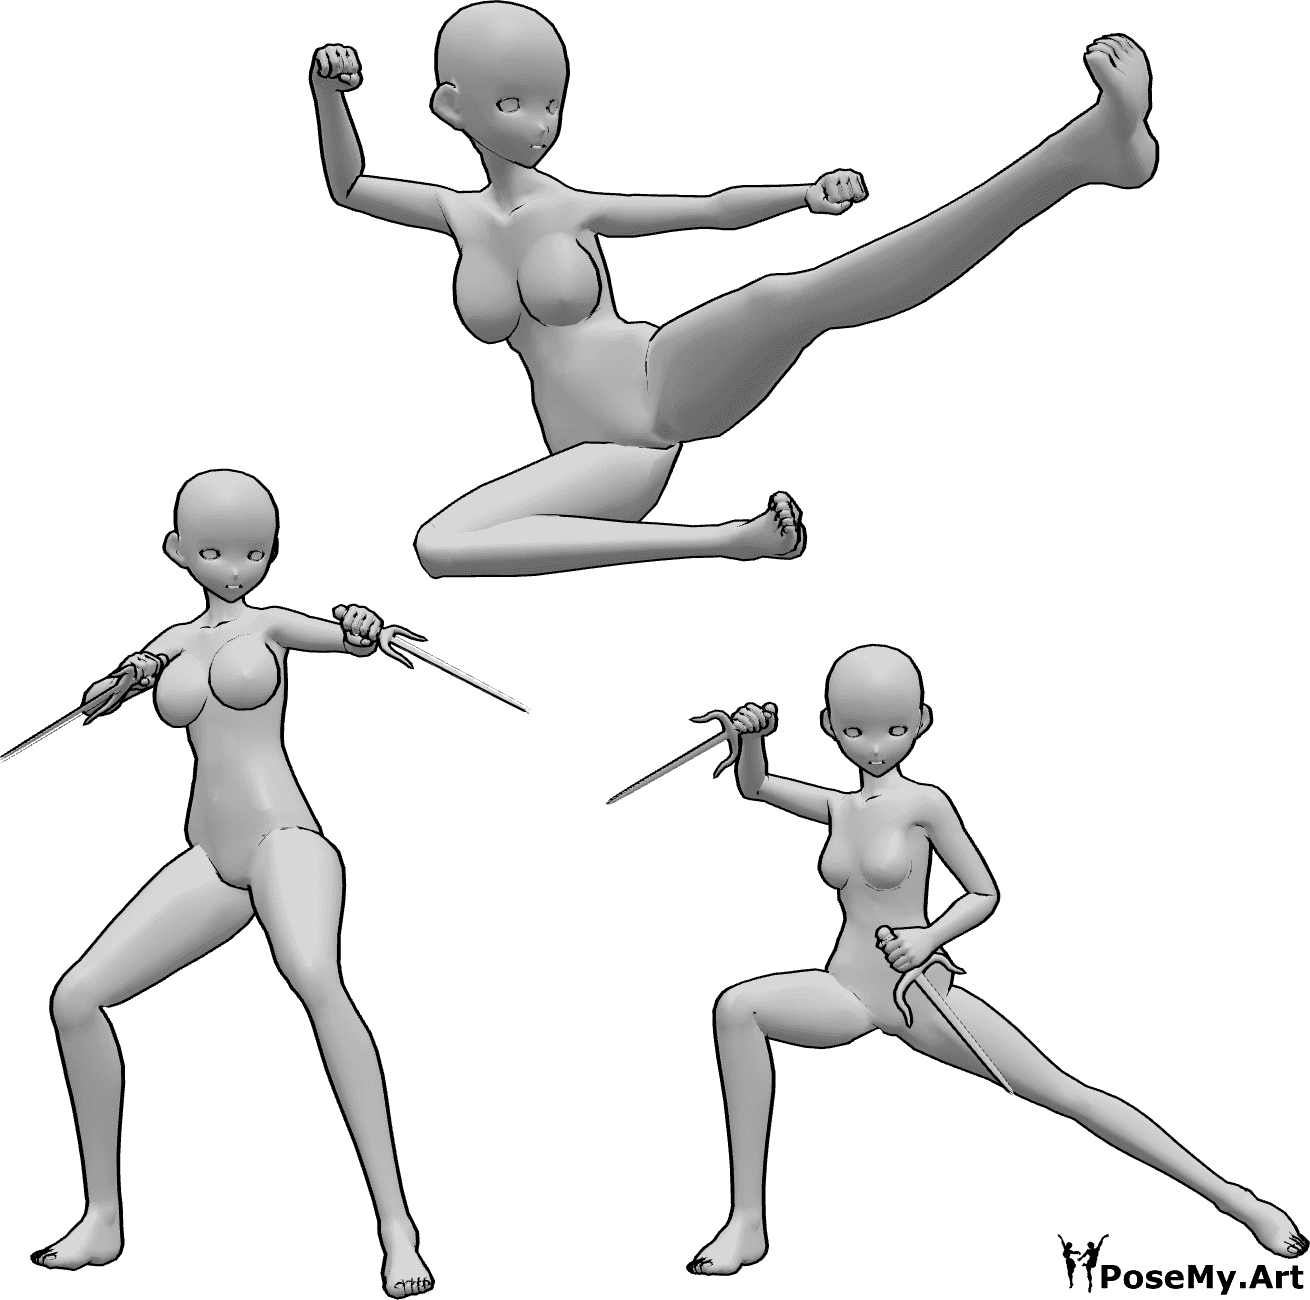 Pose Reference- Anime female fighters pose - Three anime female fighters are posing with their sais, the middle one jumps high and side kicks in the air